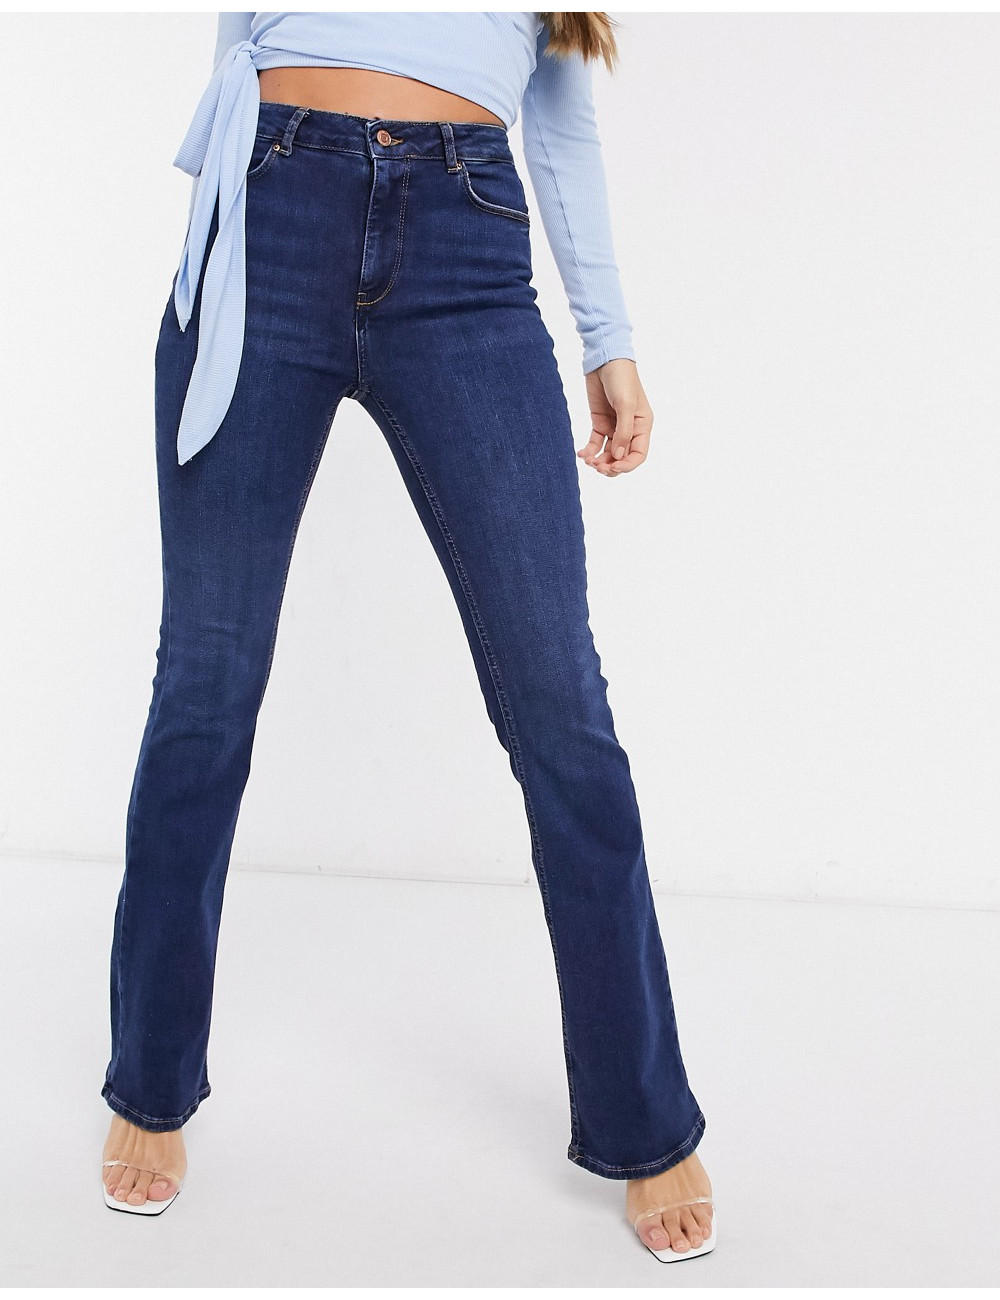 New Look flare jean in blue